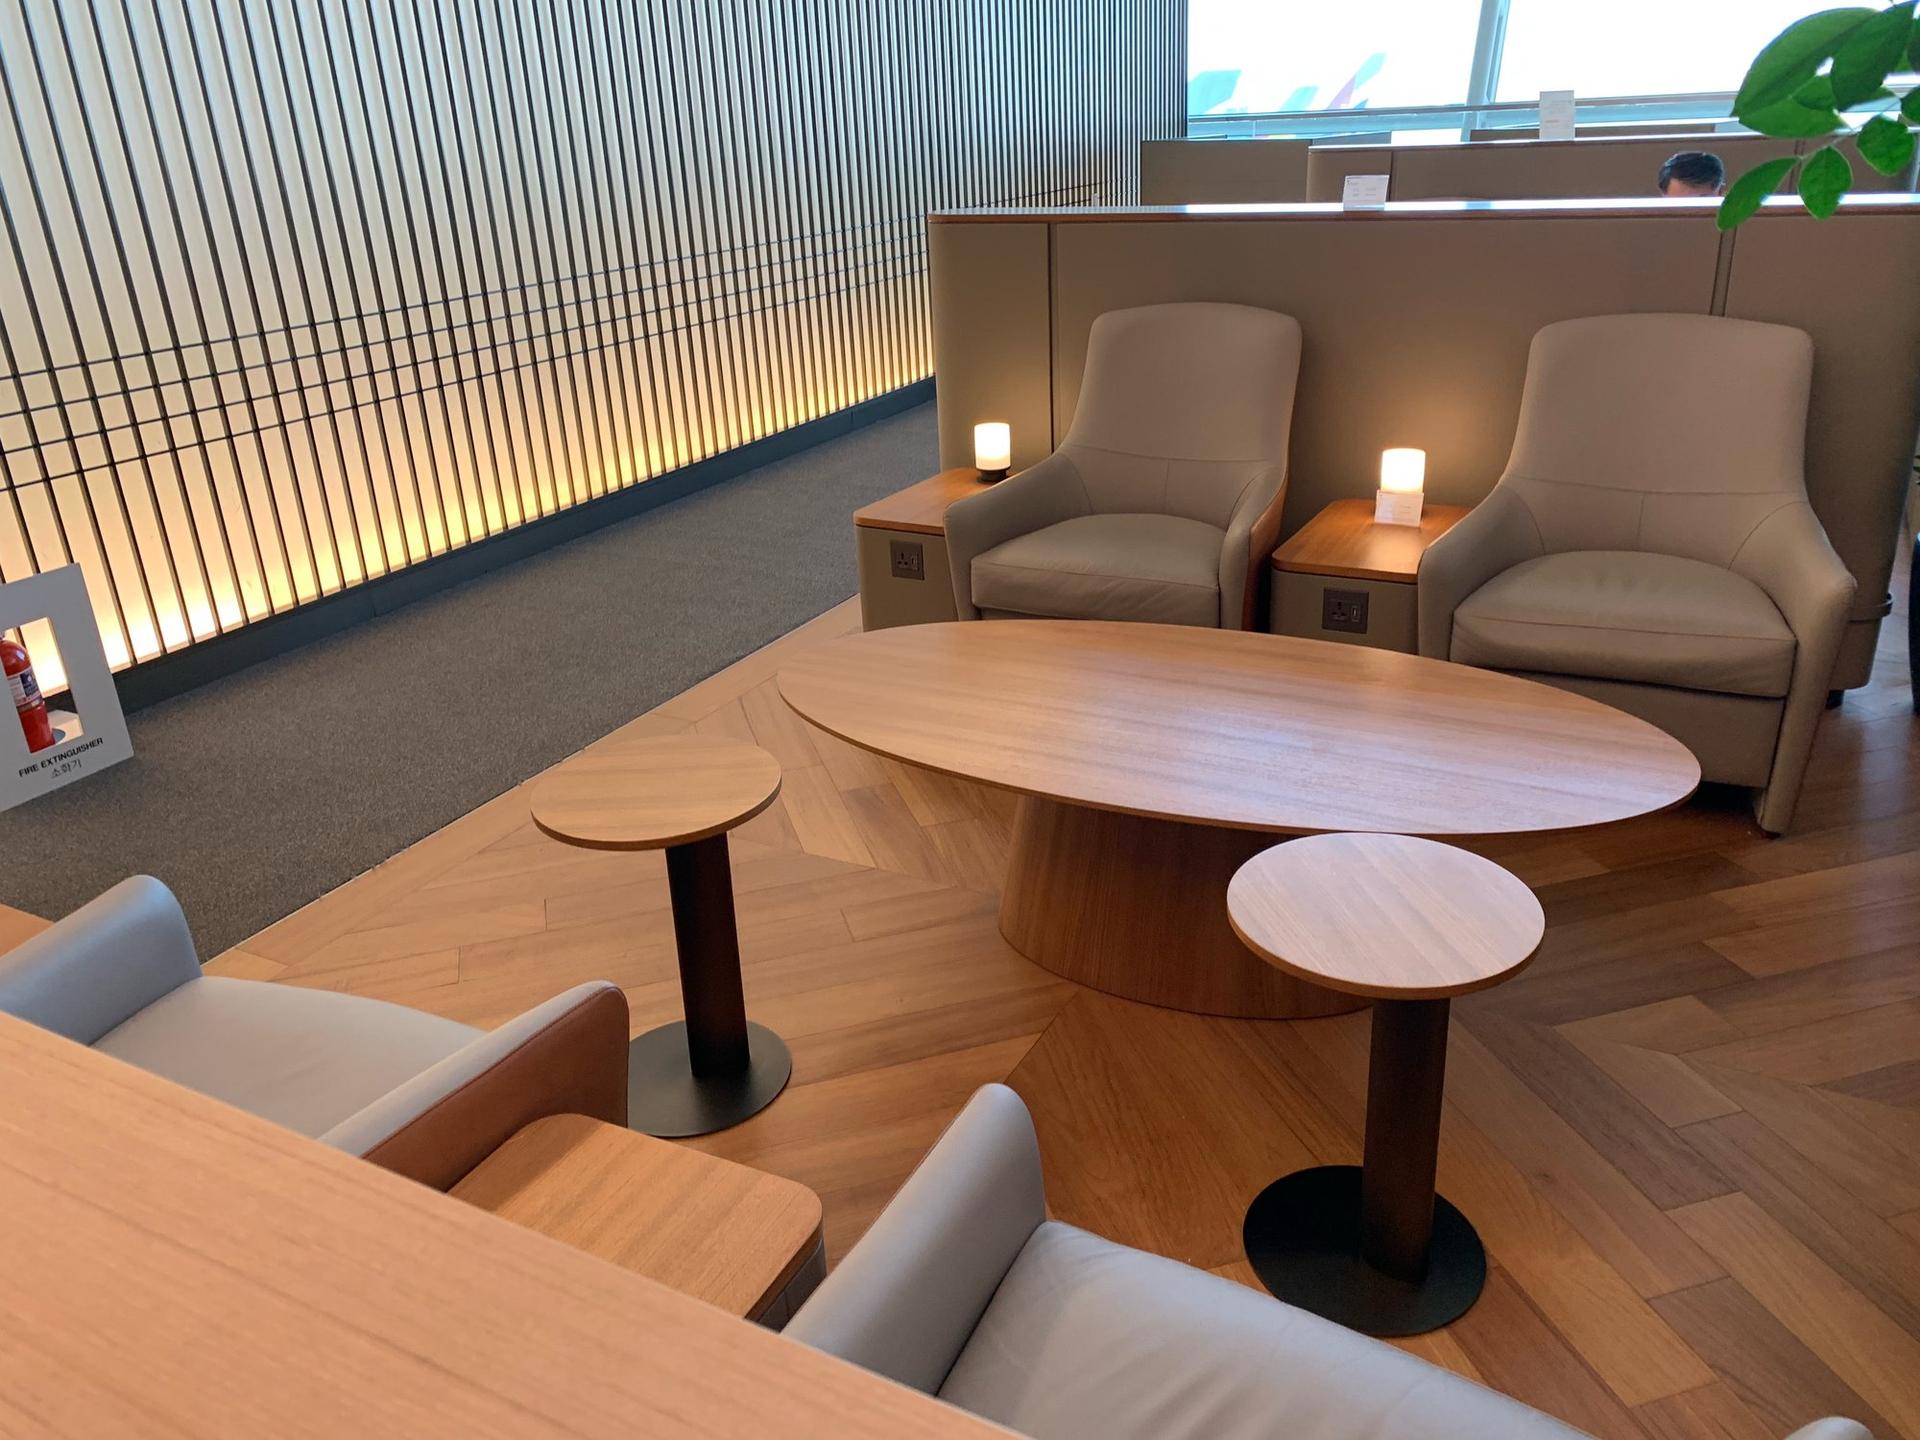 Asiana Airlines Business Suite Lounge image 9 of 15